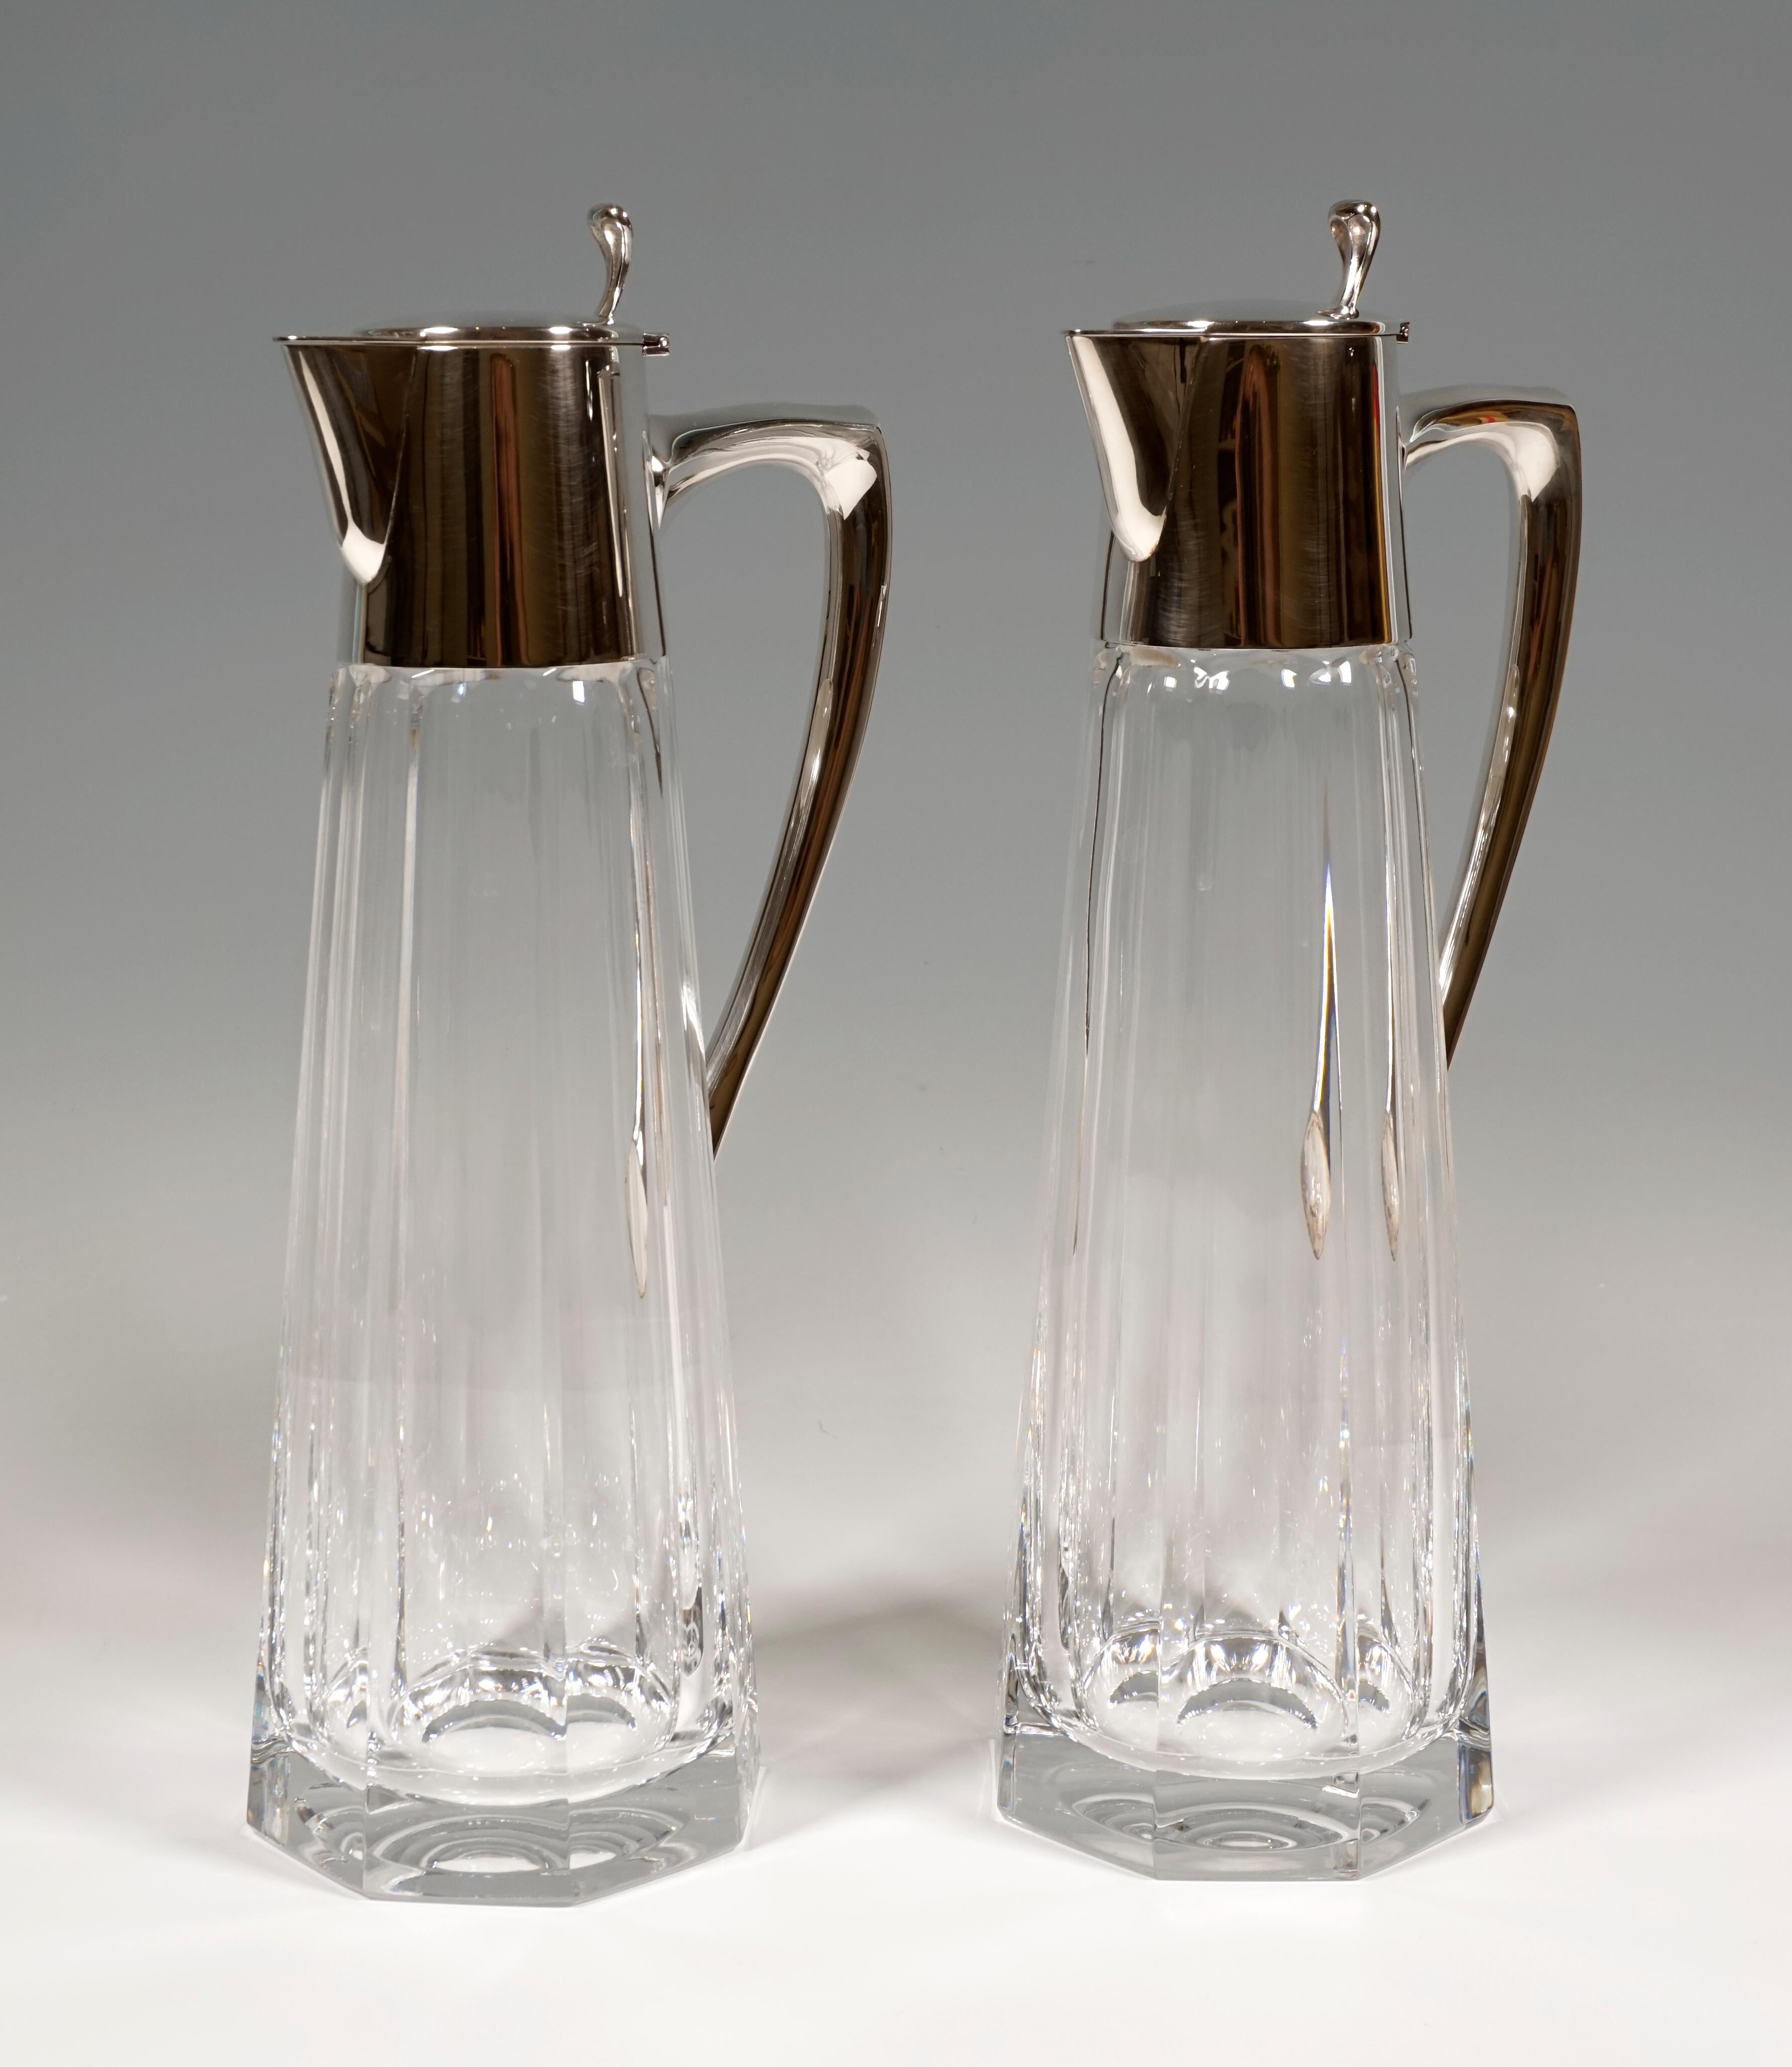 Pair of glass carafes made of faceted clear glass on an octagonal stand, silver mount with hinged lid with thumb rest and elegantly curved handle.

Dimensions:
Height 31.0 cm / 12.20 in
Width 13.0 cm / 5.11 in
Depth 9.5 cm / 3.74